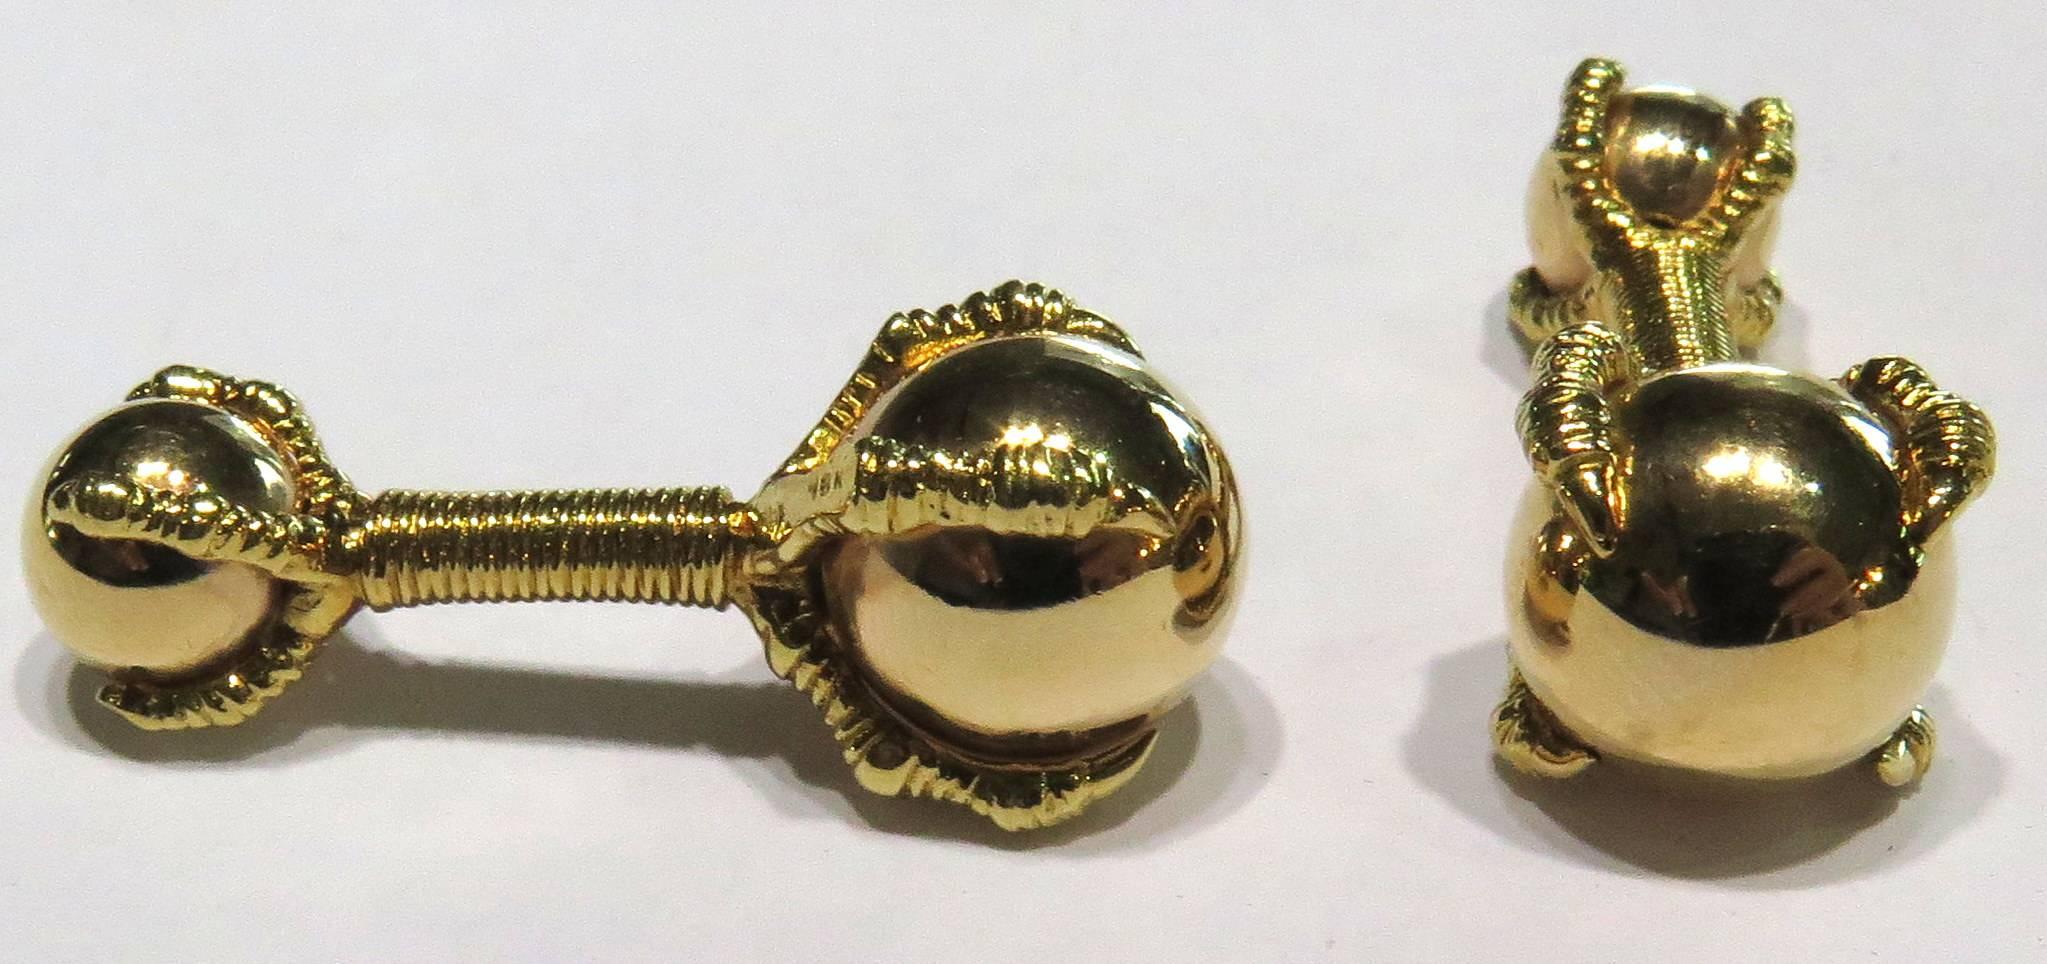 These incredible Tiffany France 18k gold cufflinks will always get you compliments! Each cufflink has a claw grasping a ball, one side larger than the other.  Dress them up or down, they will absolutely complement any shirt.
These cufflinks measure